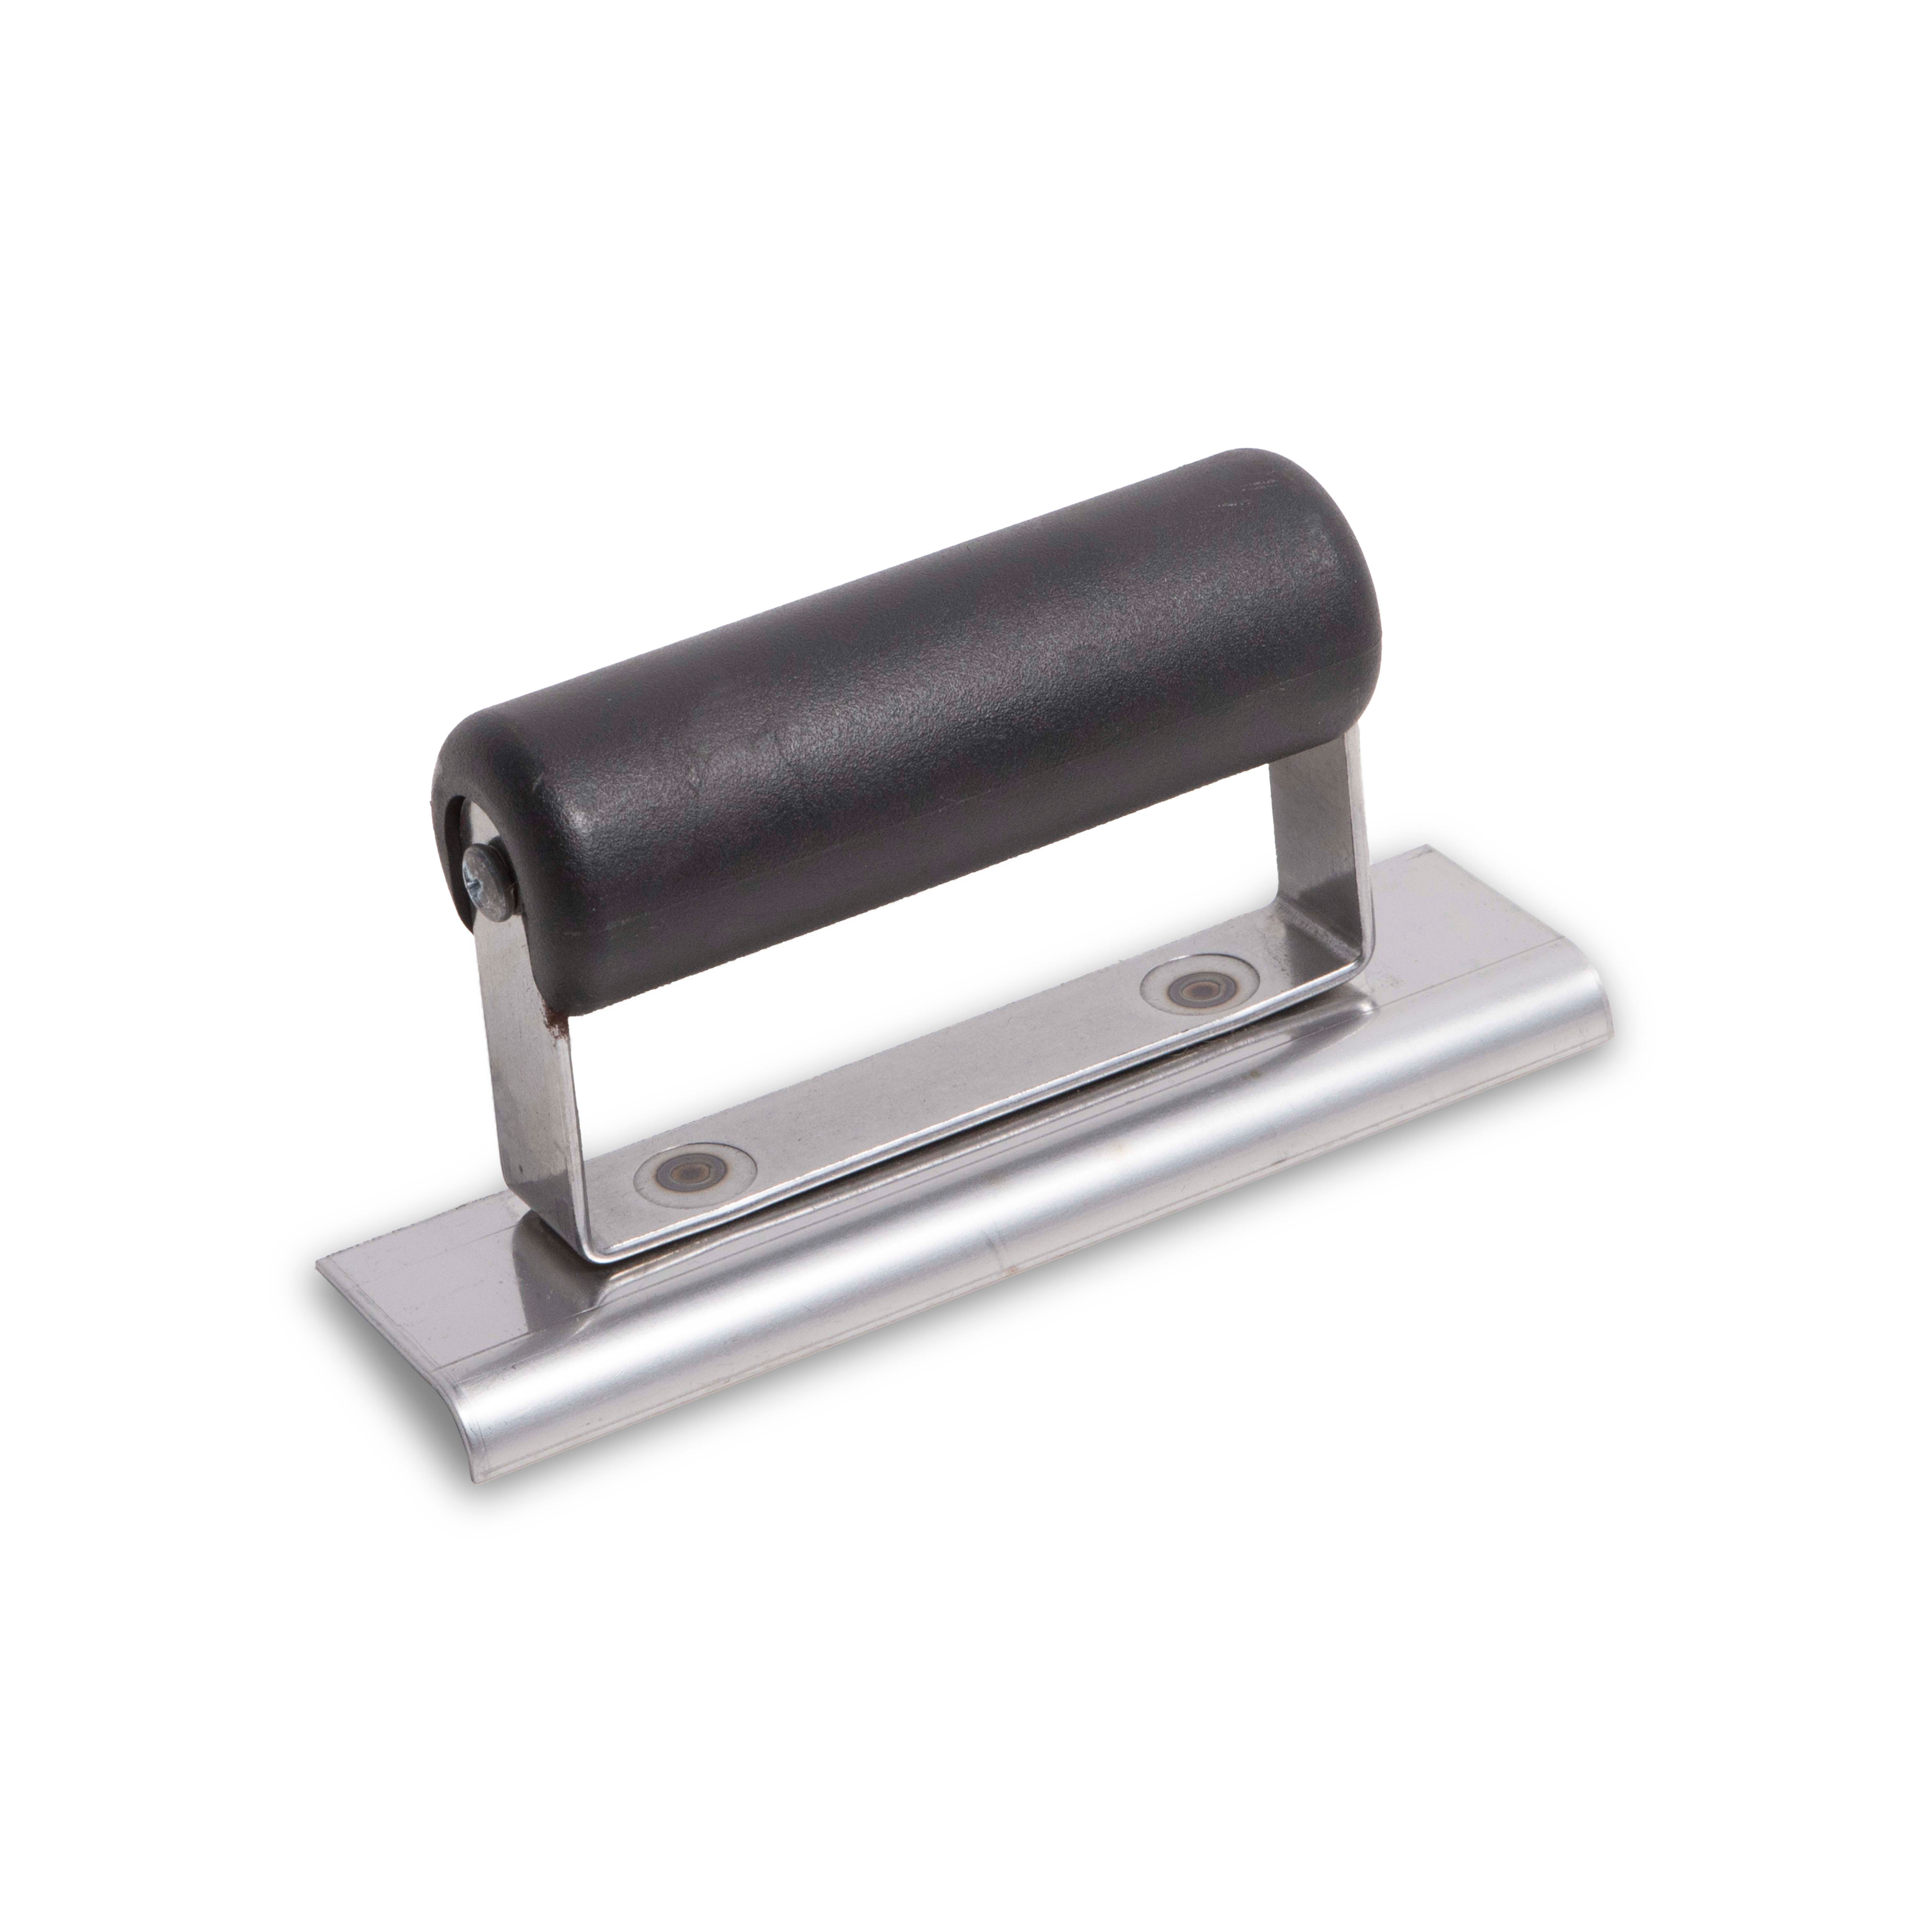 Marshalltown - QLT CE500SP 6inx 1-1/2in Stainless Steel Edger; 1/4R, 3/8L-Plastic Handle CE500SP